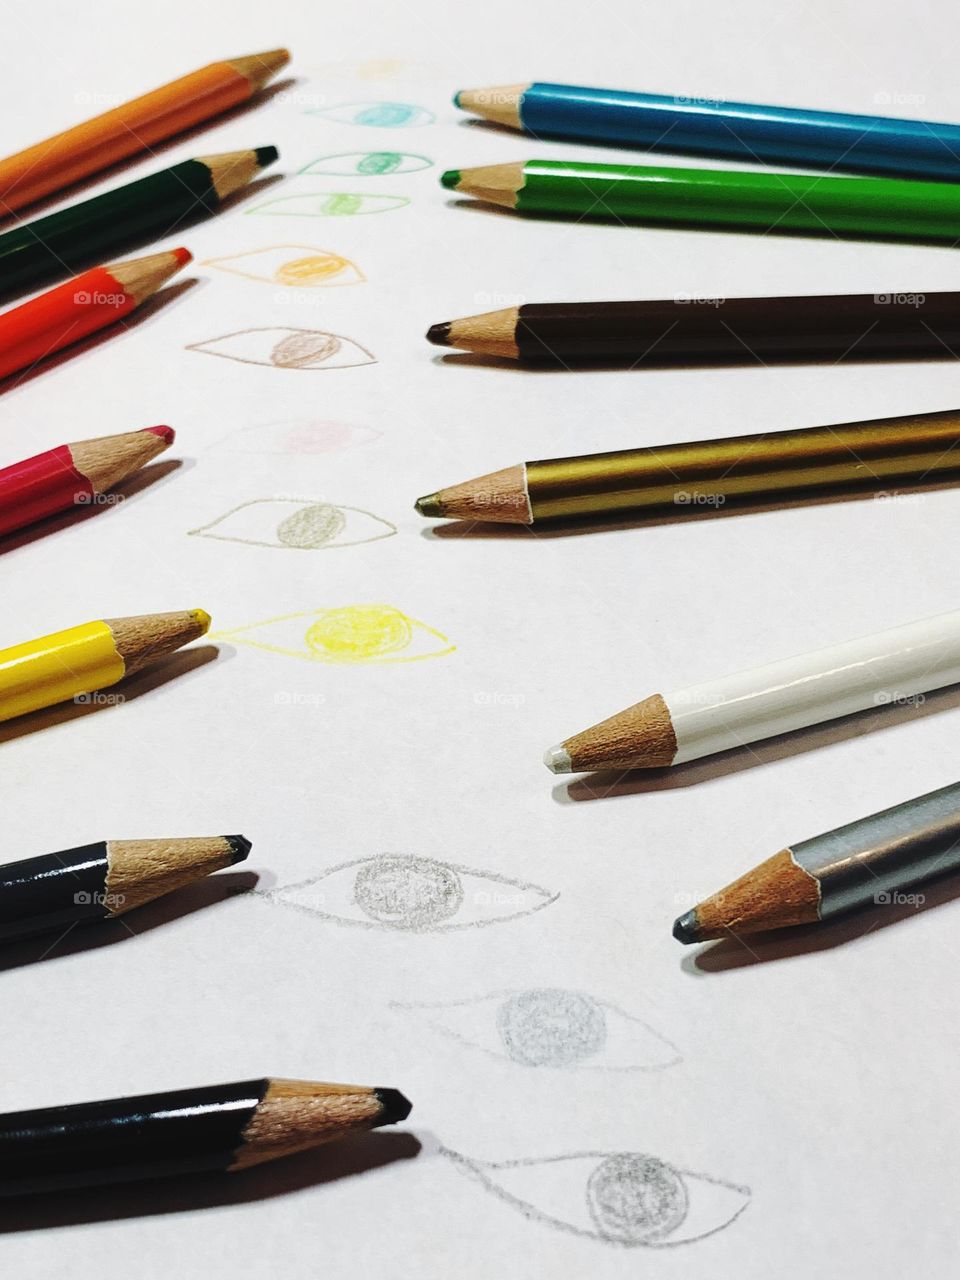 Eyes drawings using colored pencils.